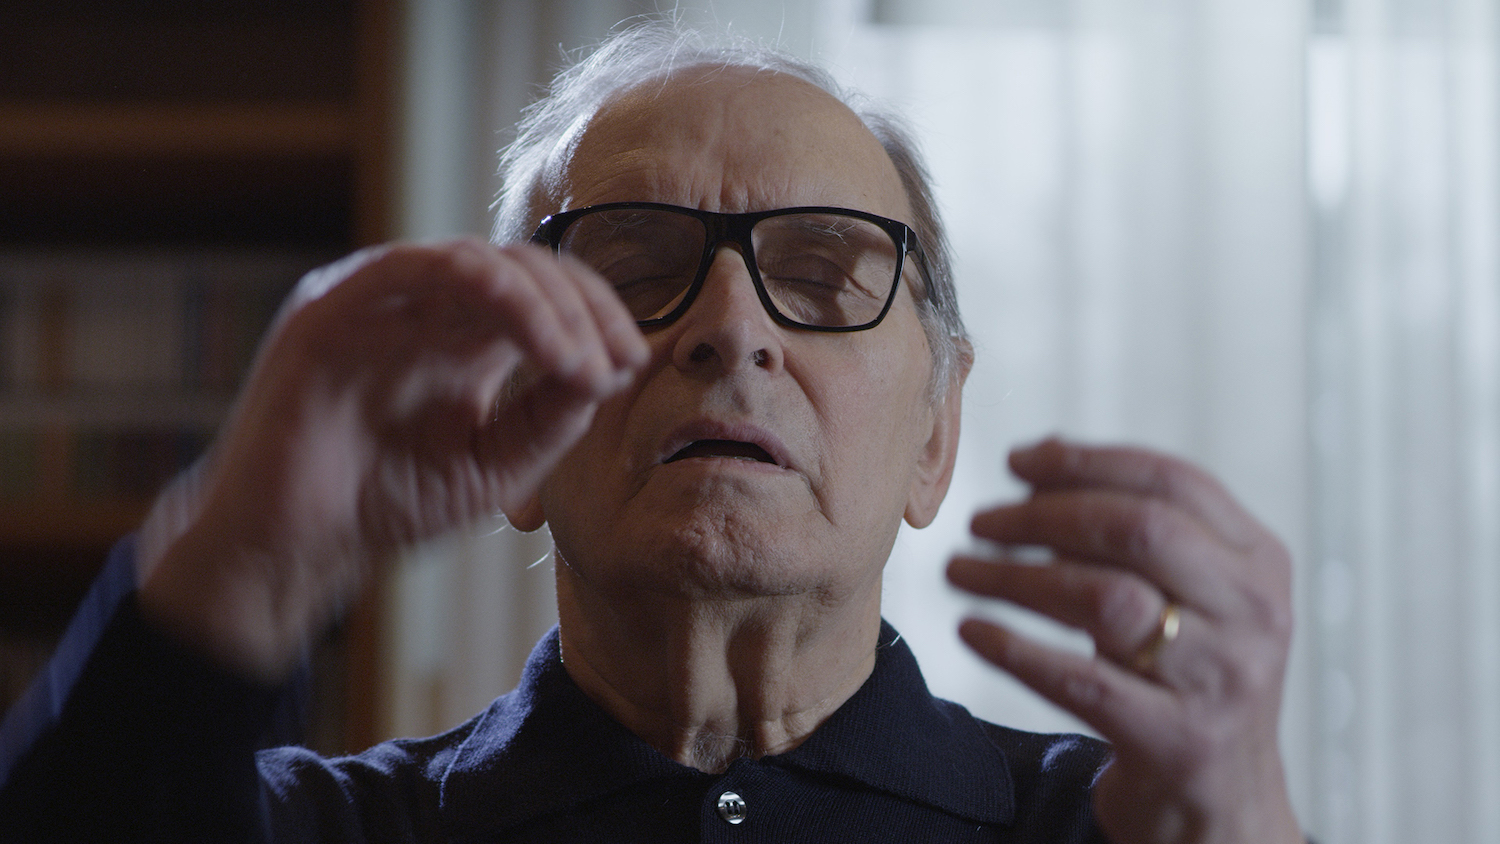 Ennio Morricone sits with his eyes closed and his hands moving in front of his face.